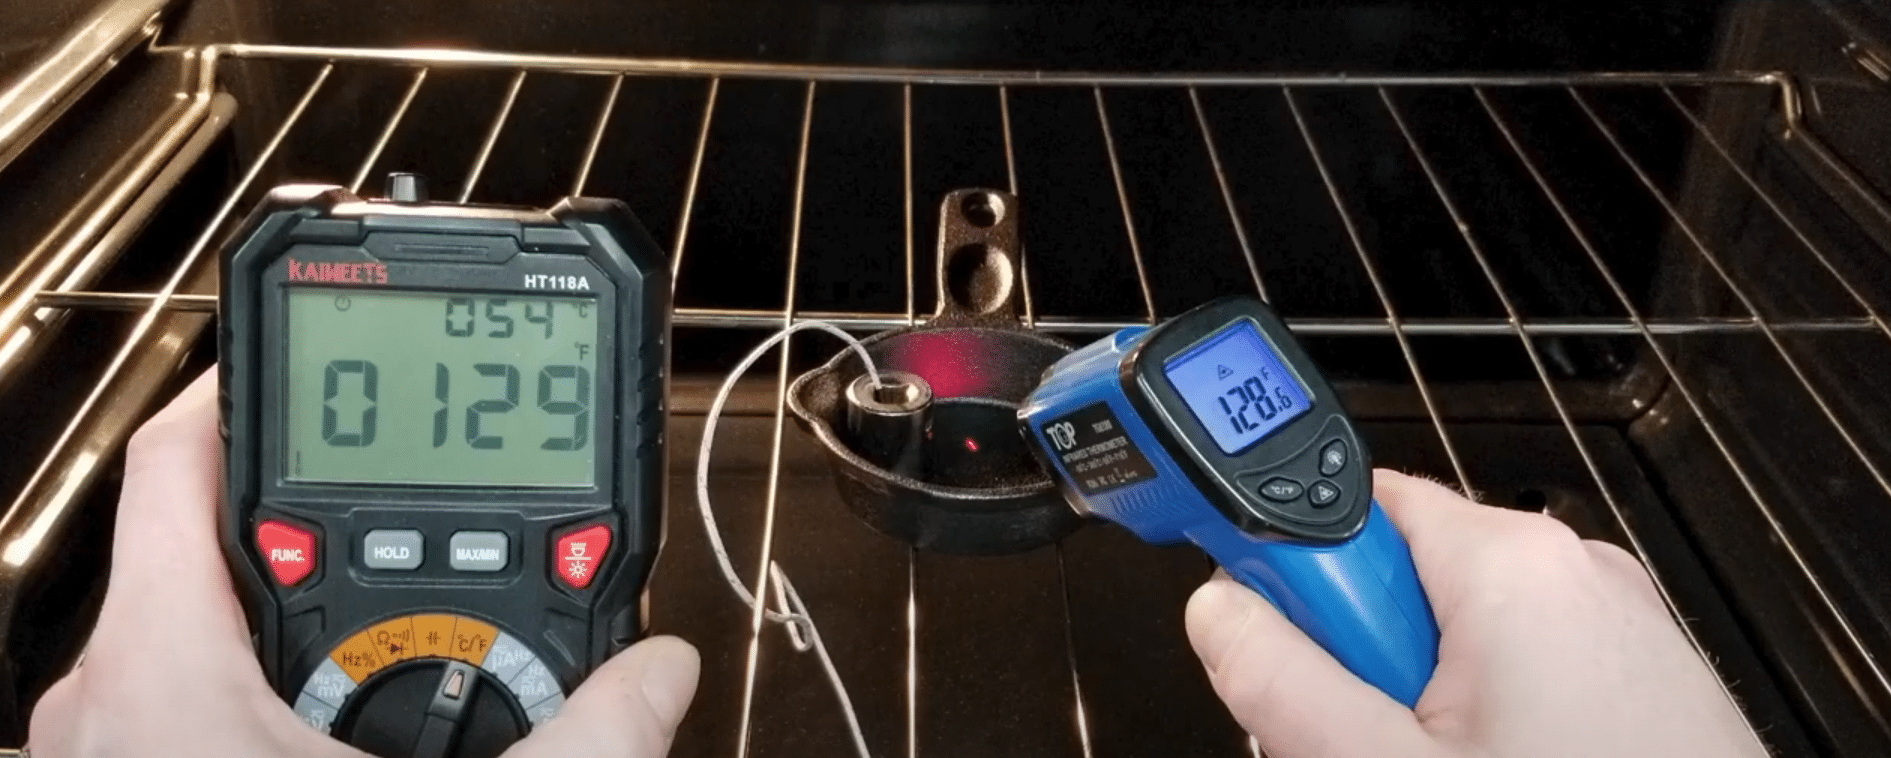 Featured image for “How to properly test your range or oven temperature”